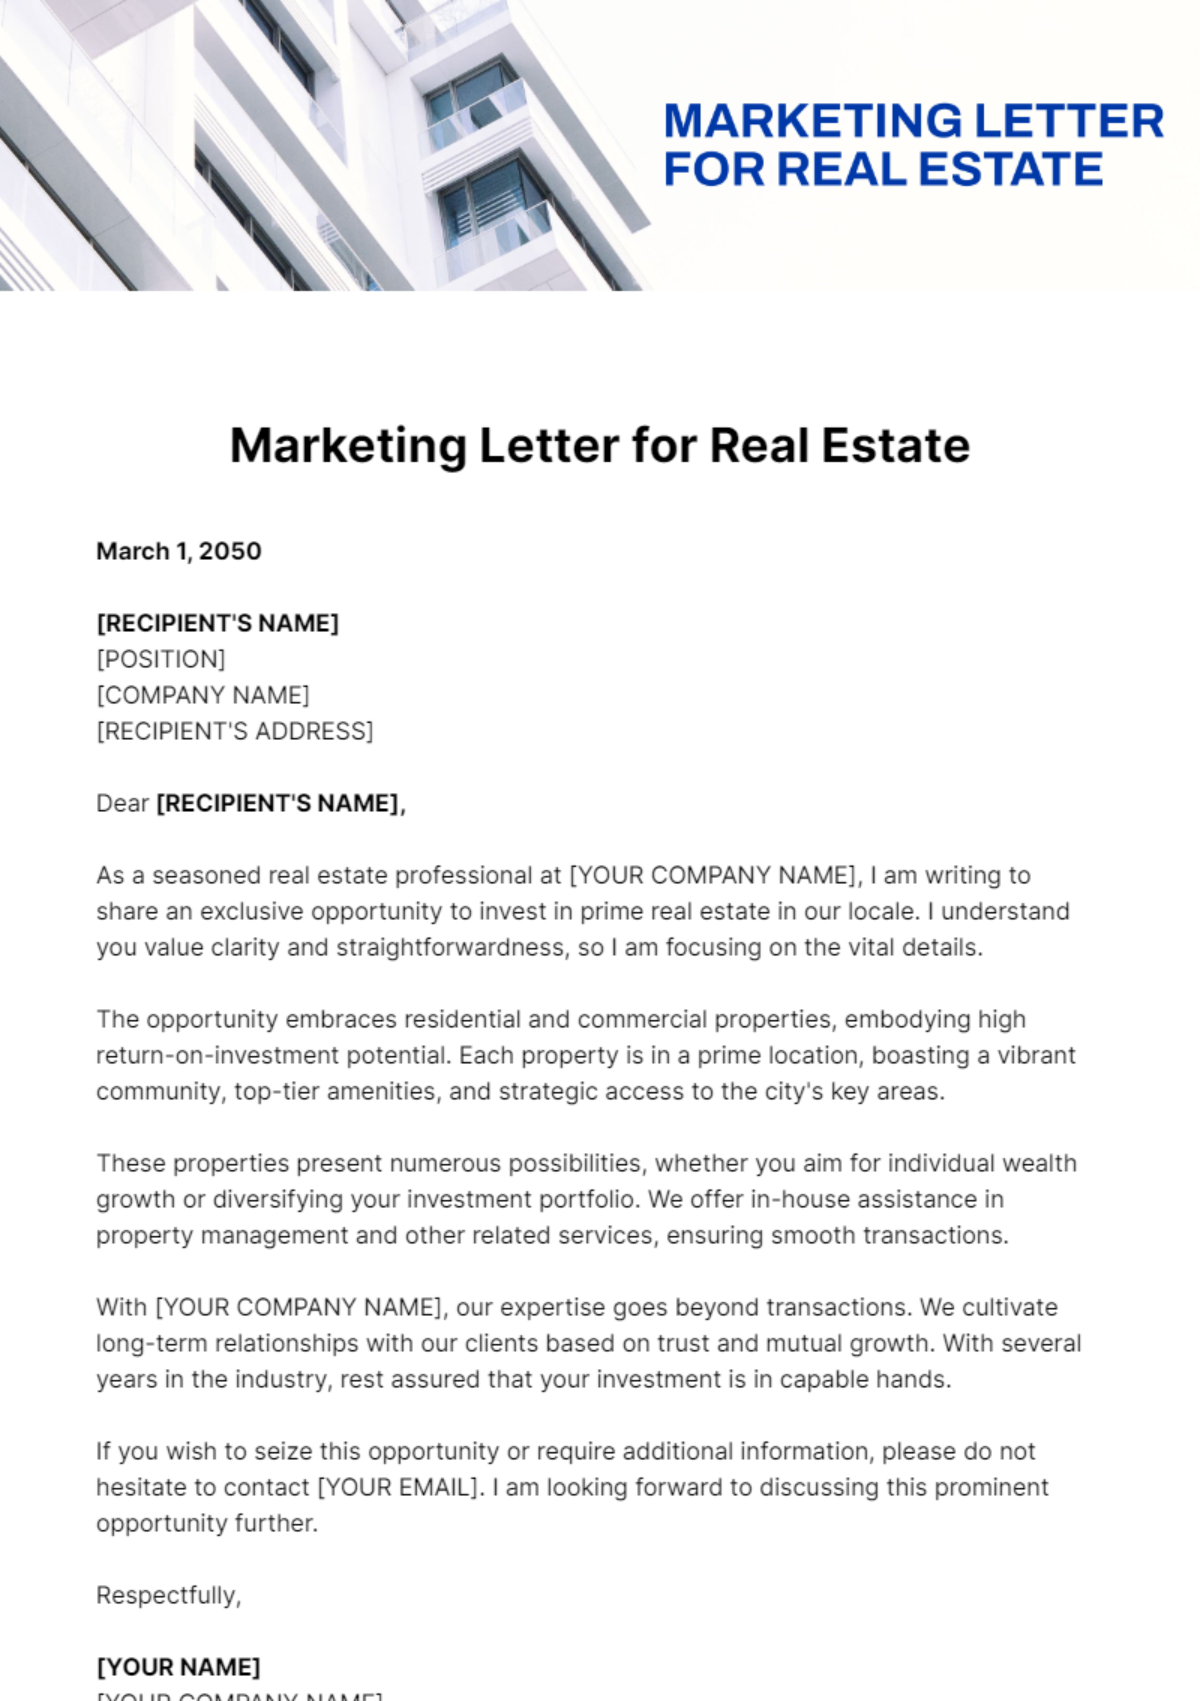 Marketing Letter for Real Estate Template